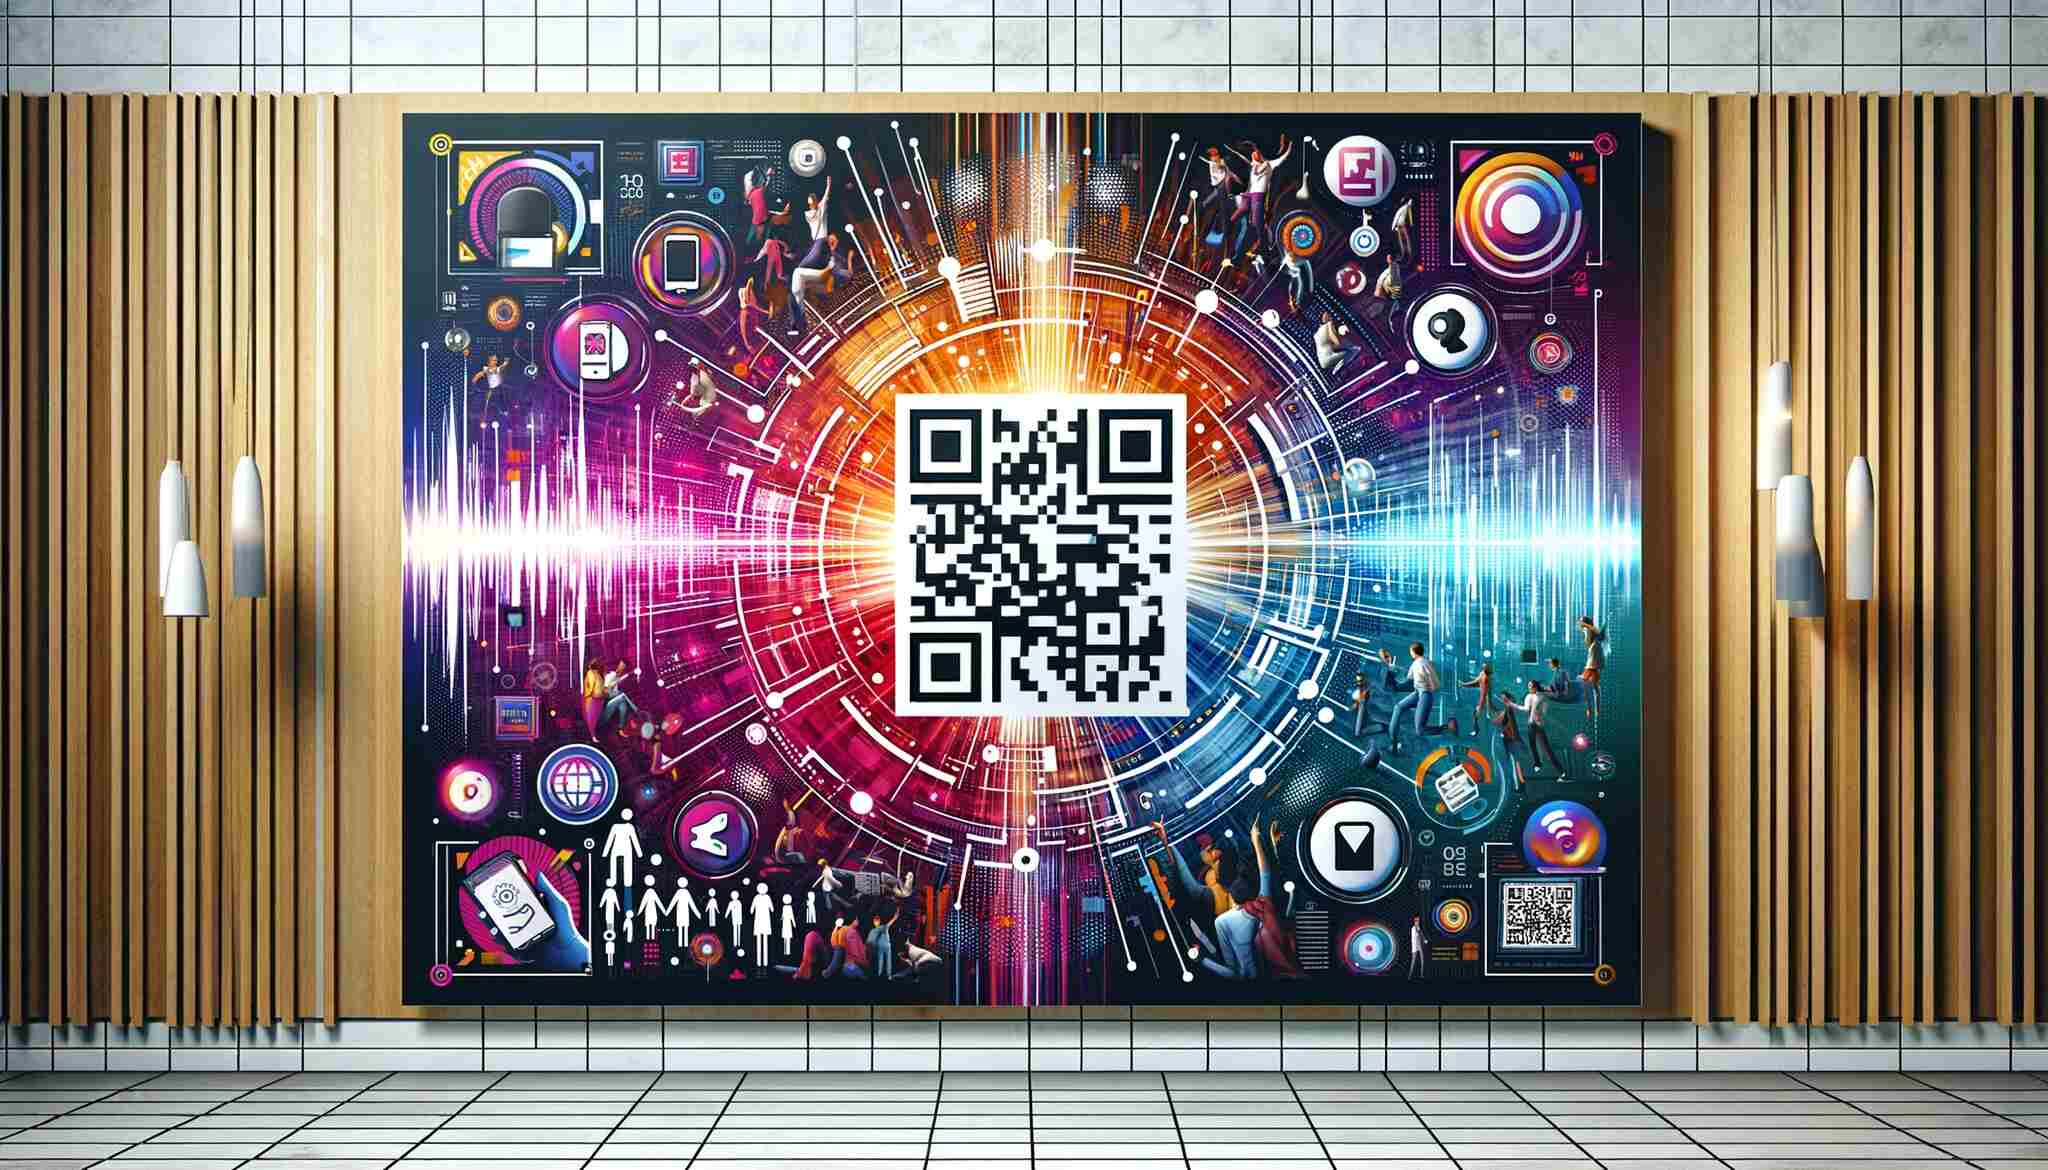 A large and vibrant poster displaying a QR code on colorful illustrations